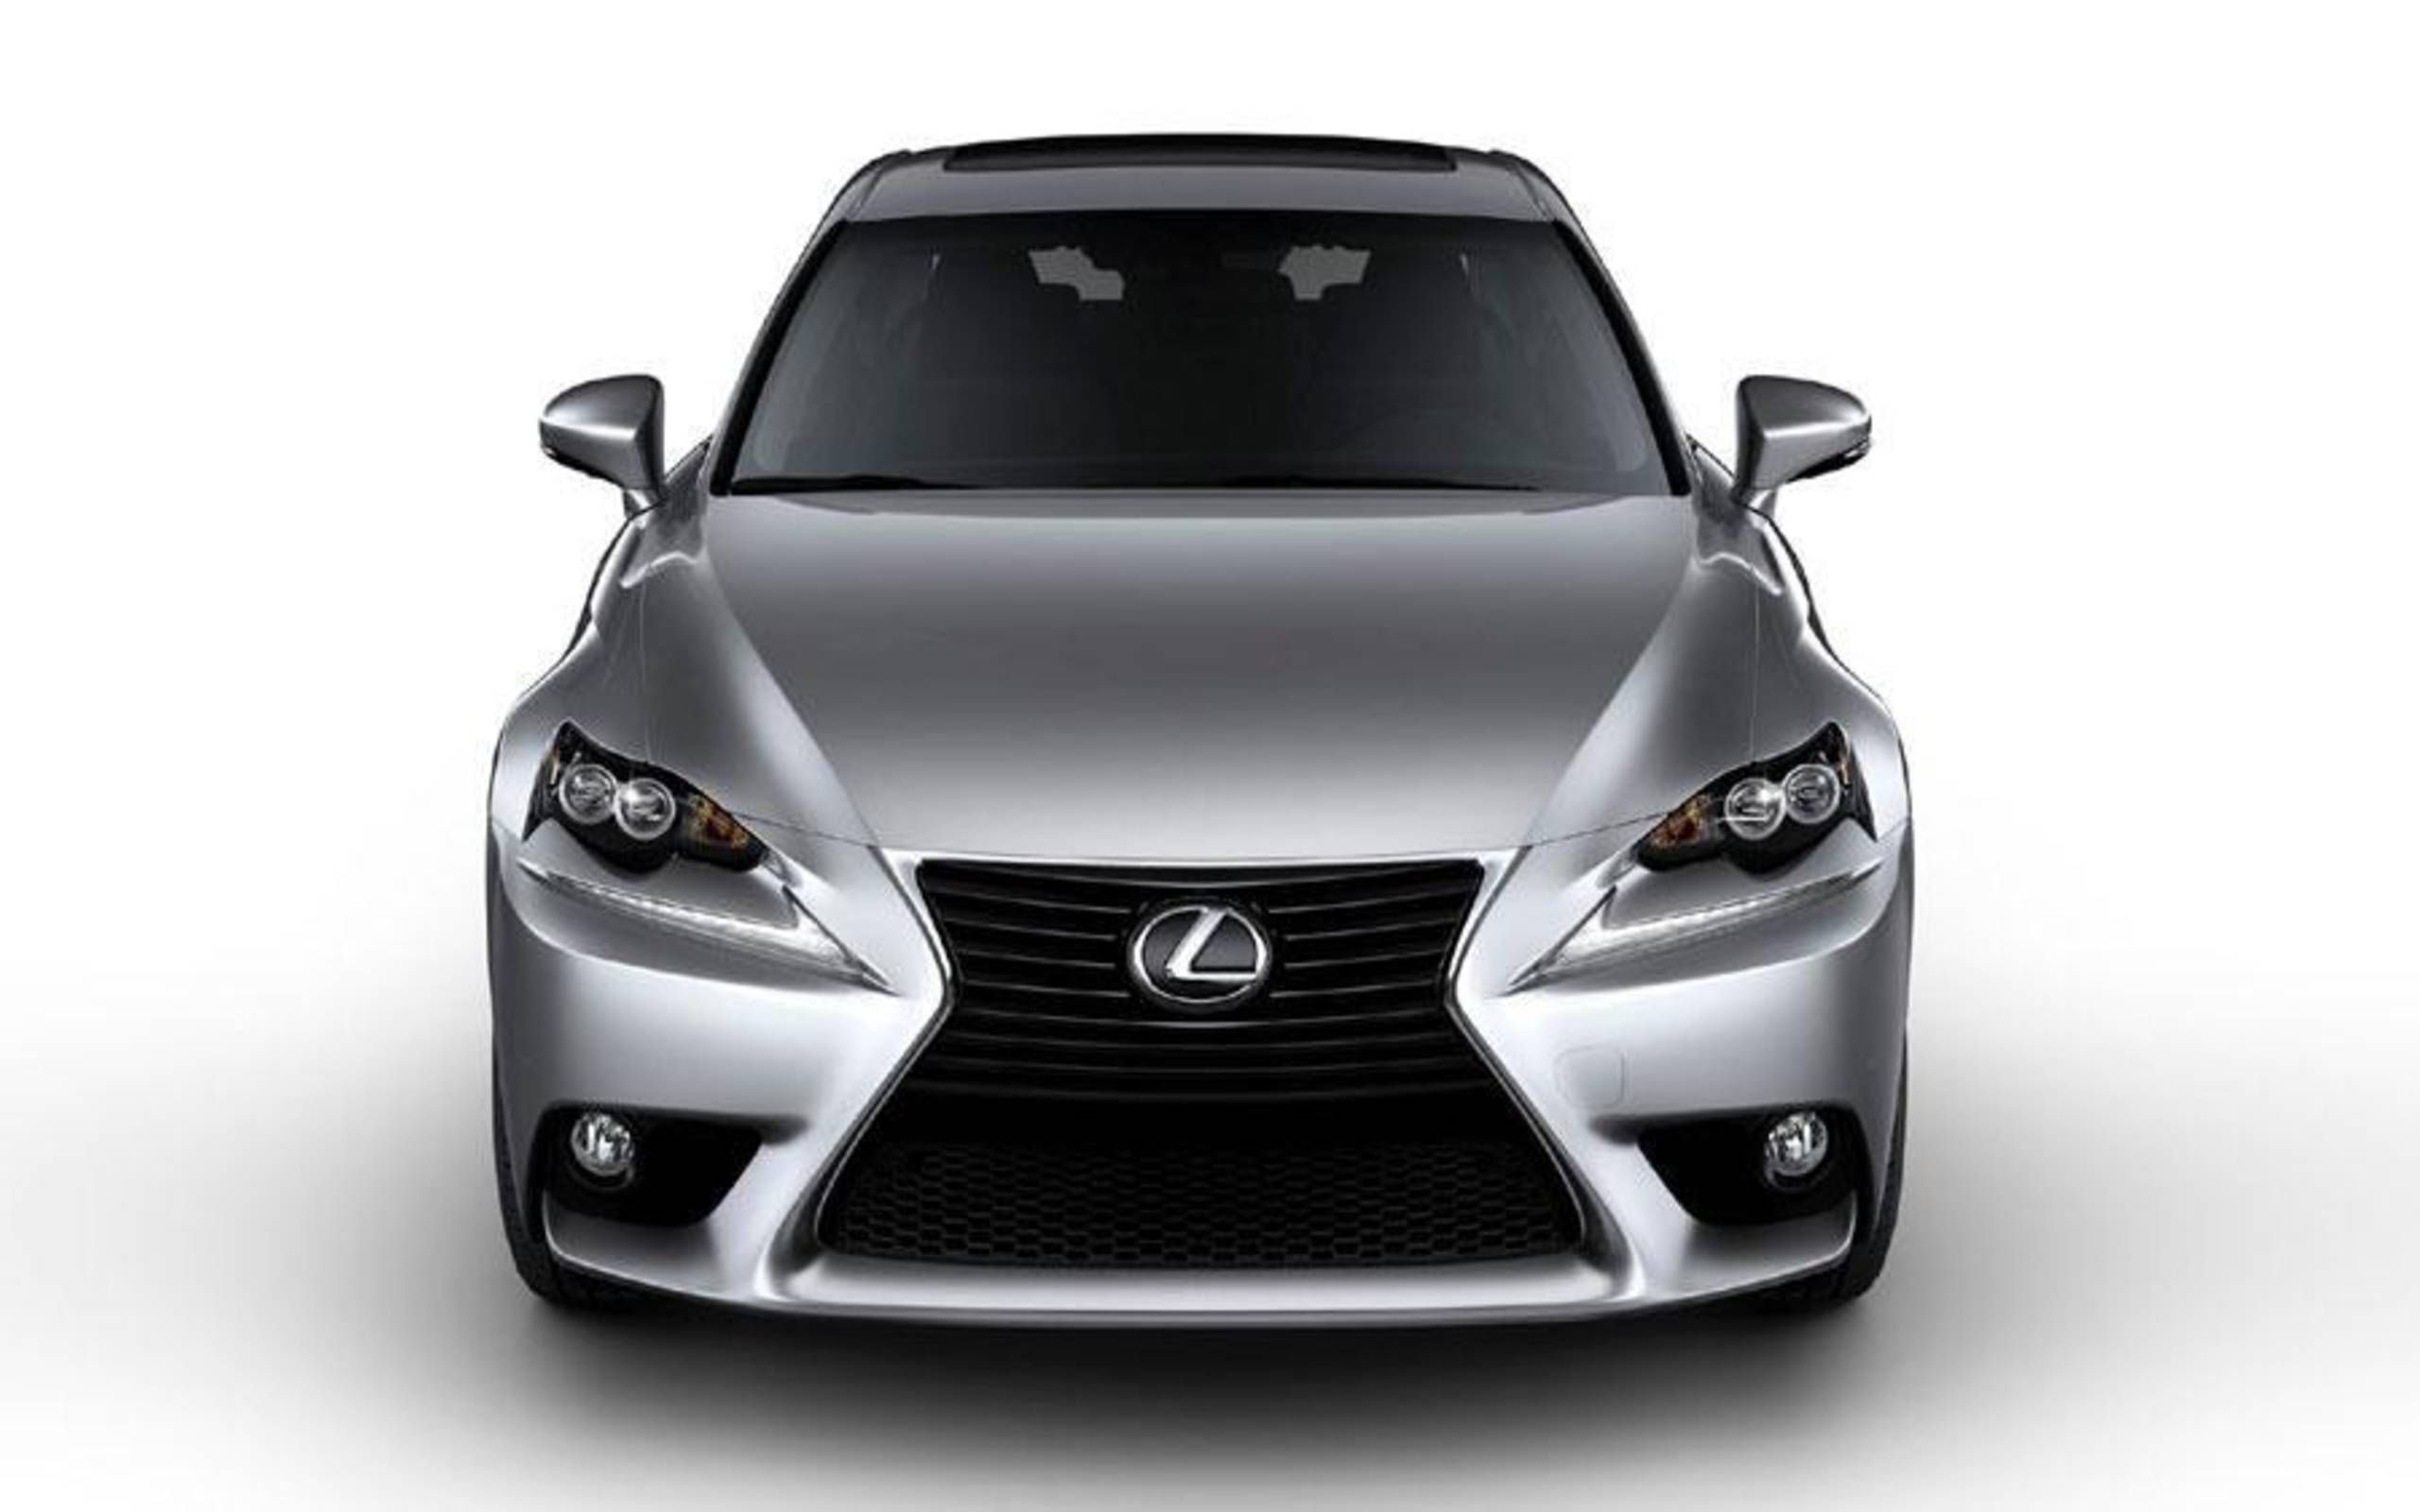 2014 Lexus IS 350 F Sport review notes